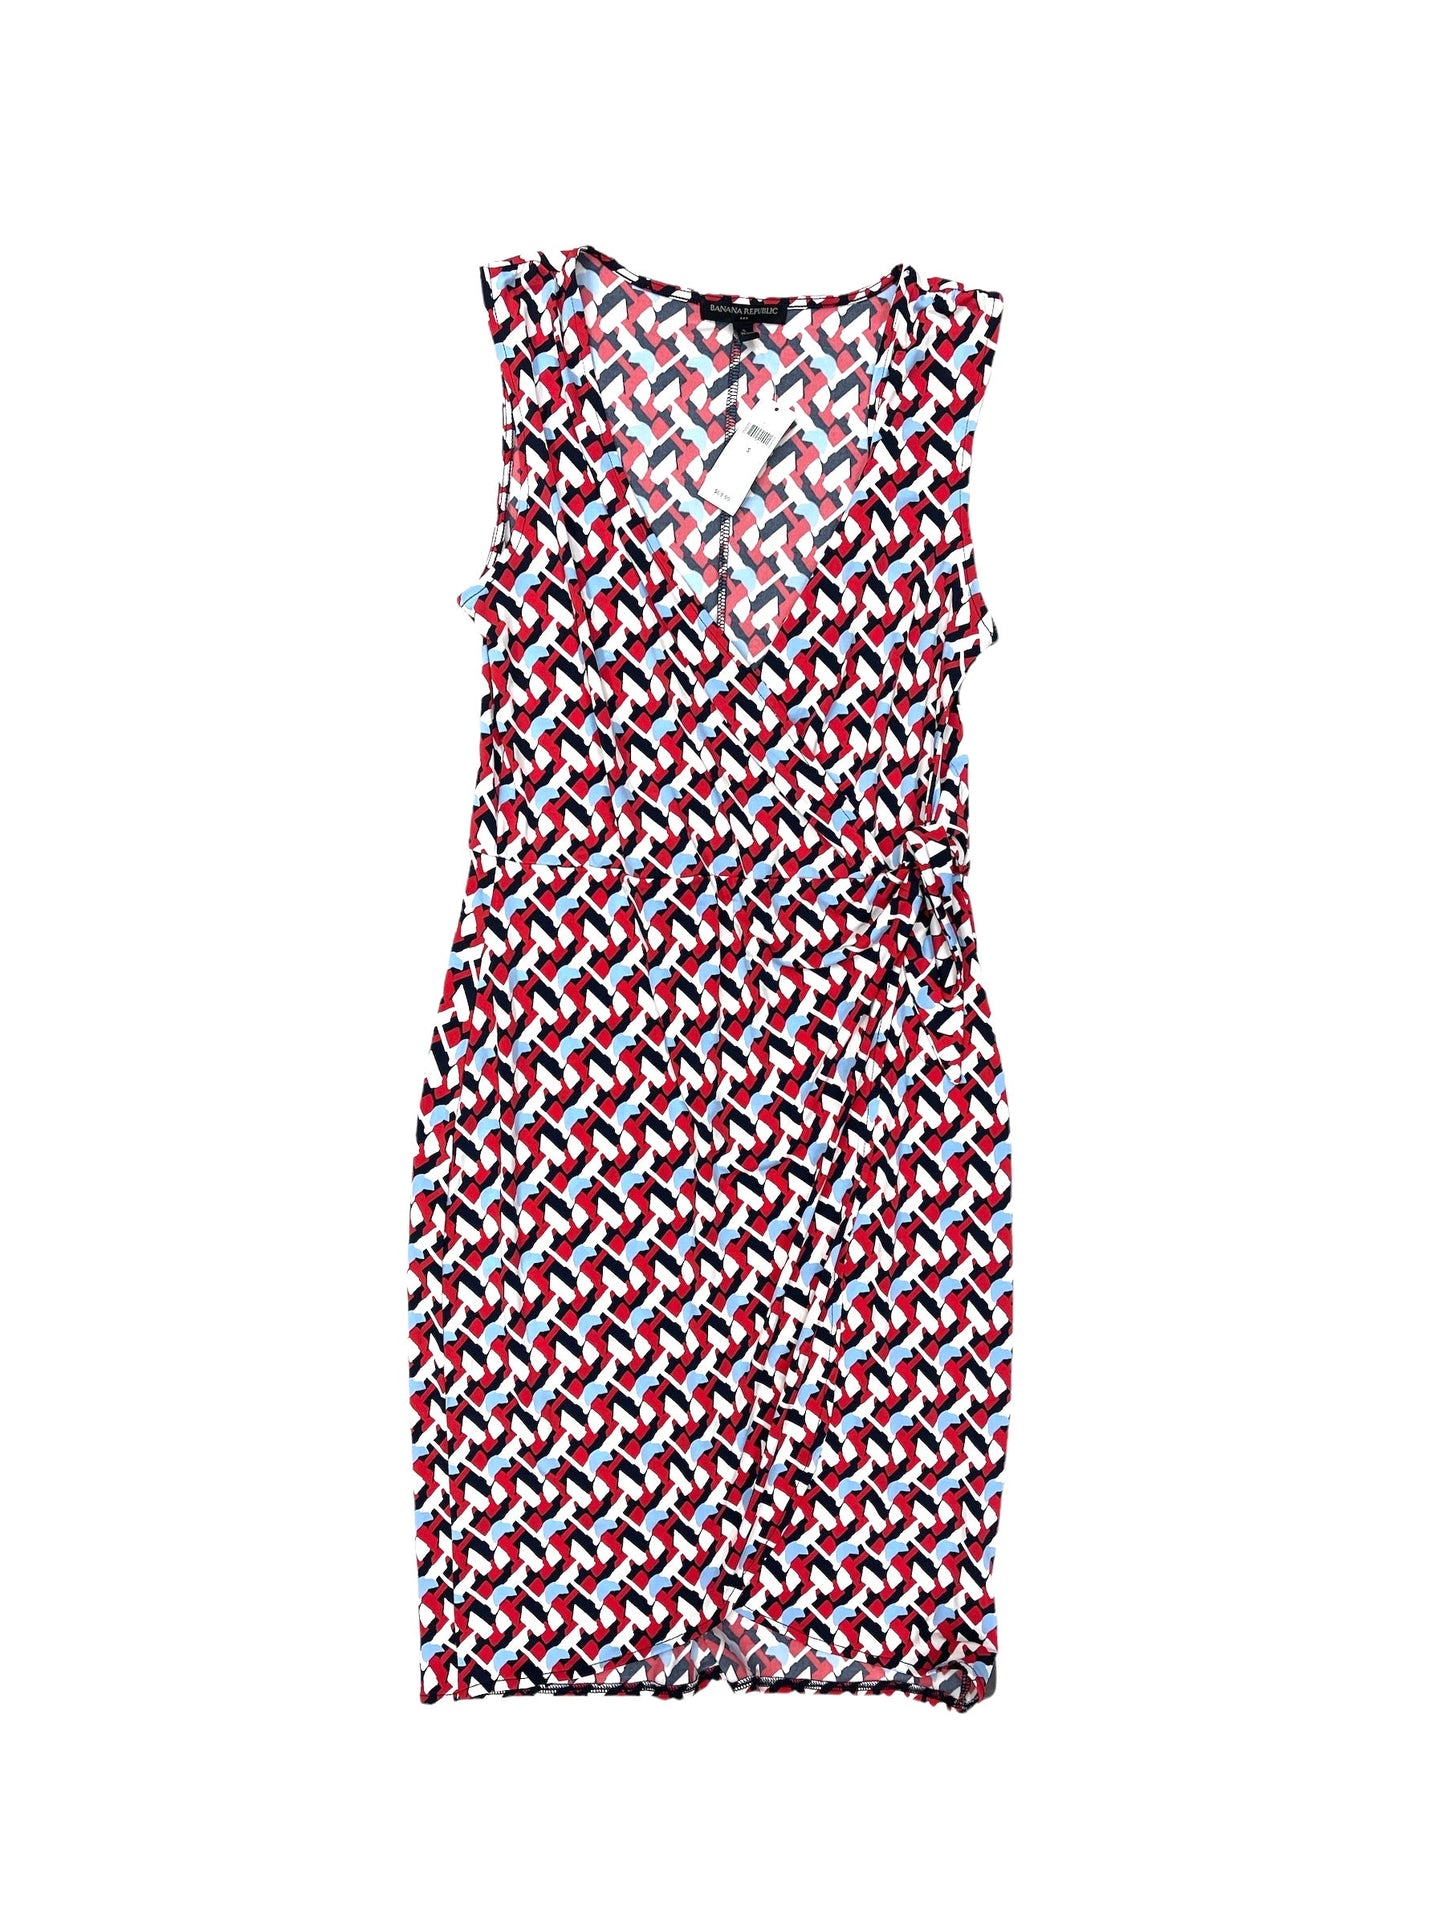 Blue & Red & White Dress Casual Short Banana Republic, Size S